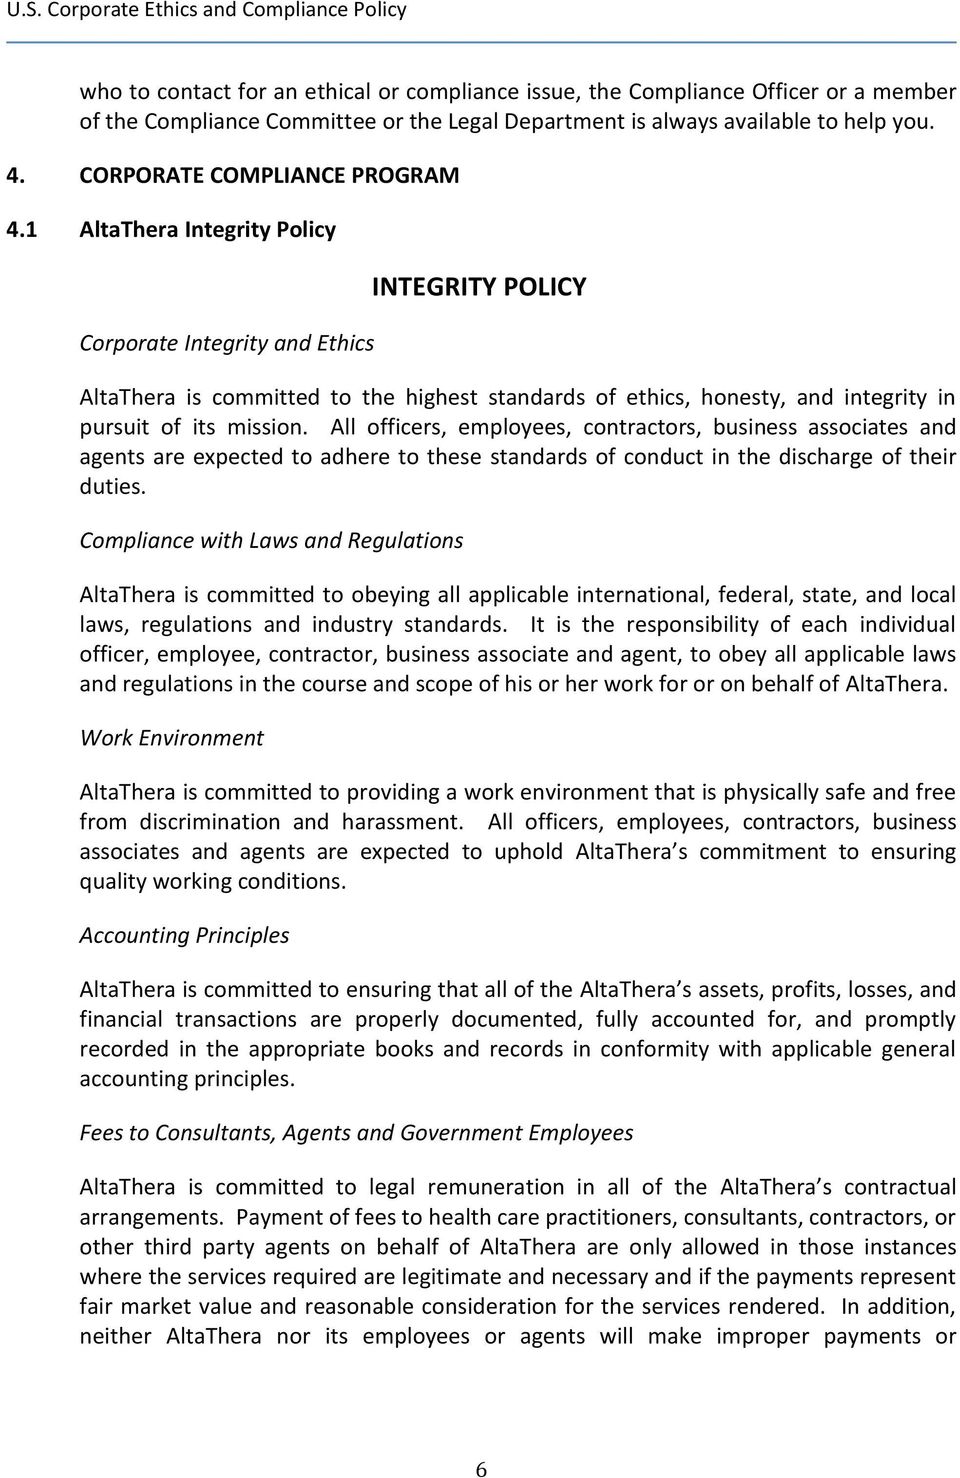 1 AltaThera Integrity Policy Corporate Integrity and Ethics INTEGRITY POLICY AltaThera is committed to the highest standards of ethics, honesty, and integrity in pursuit of its mission.